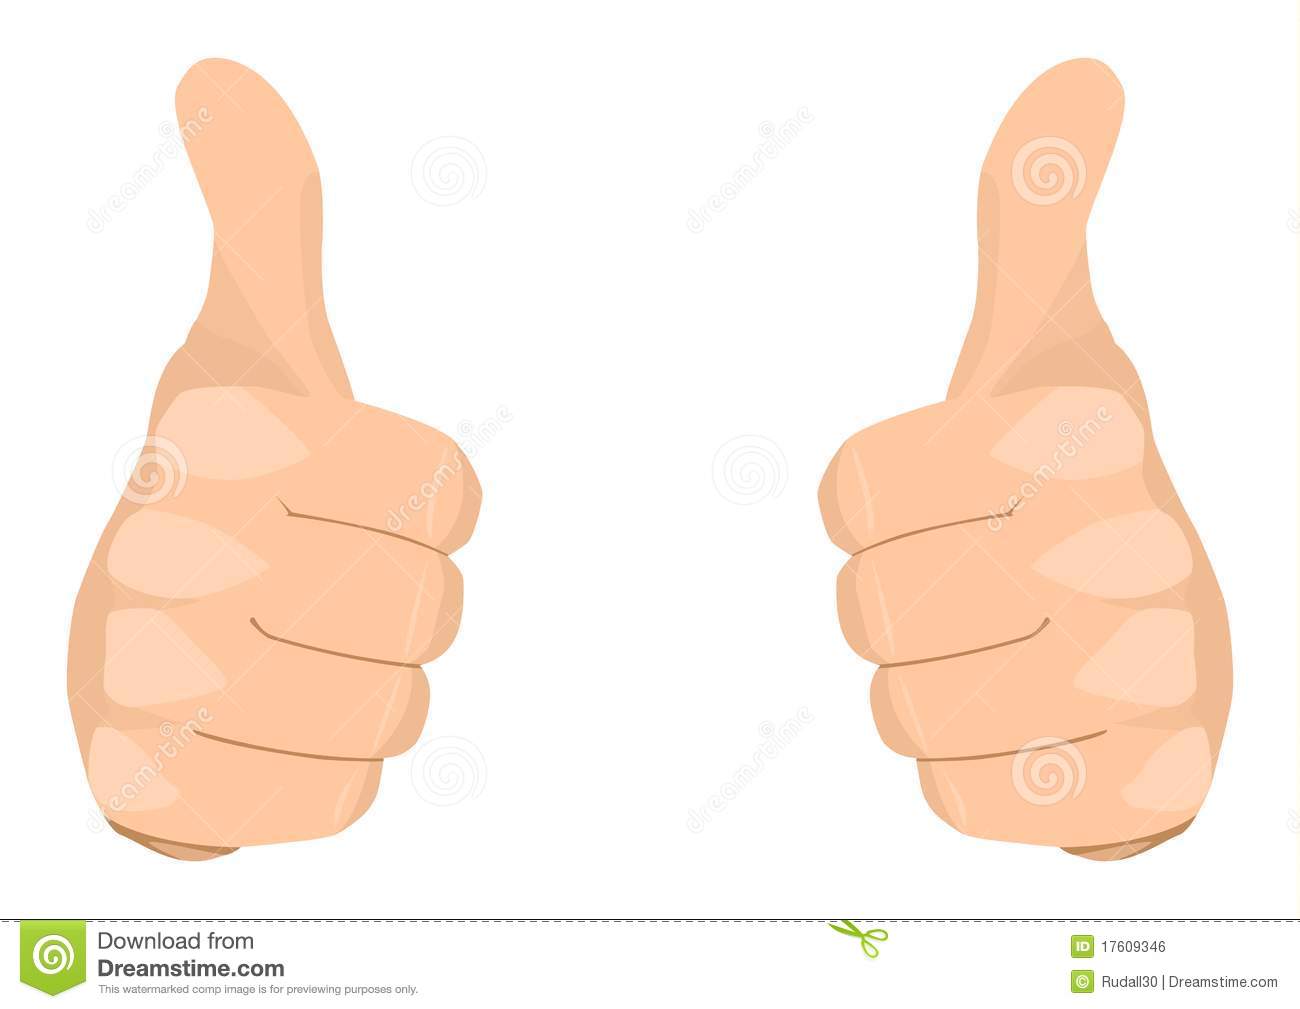 Two Thumbs Up Royalty Free Stock Image   Image  17609346